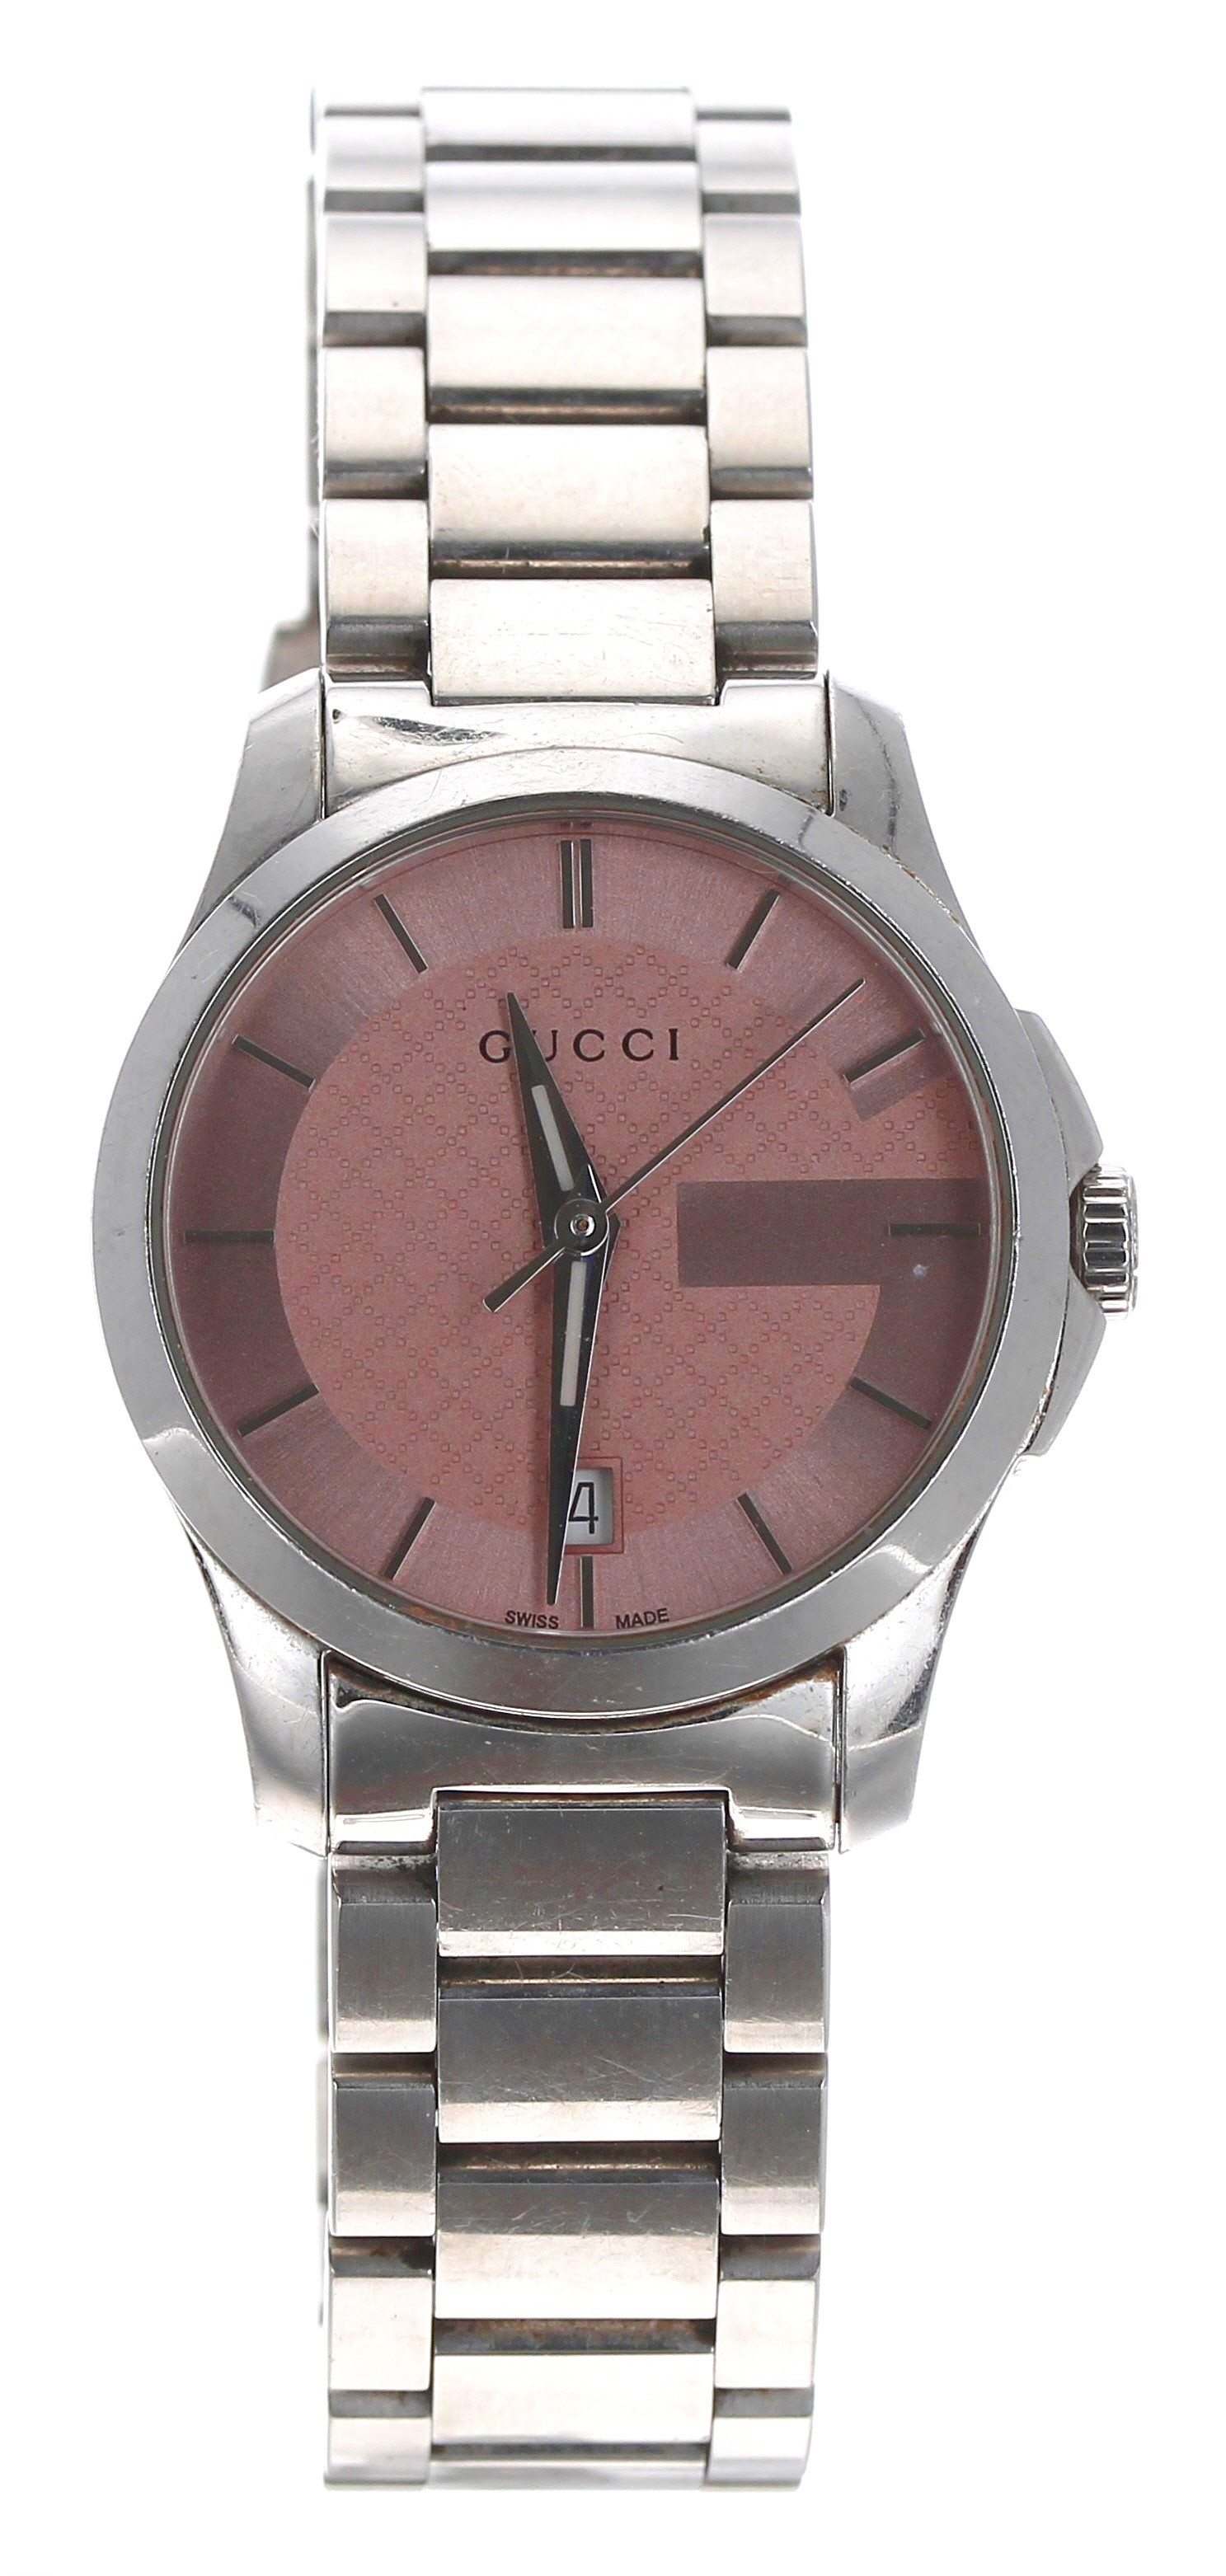 Gucci G-Timeless stainless steel lady's wristwatch, reference no. 126.5, salmon dial, quartz,